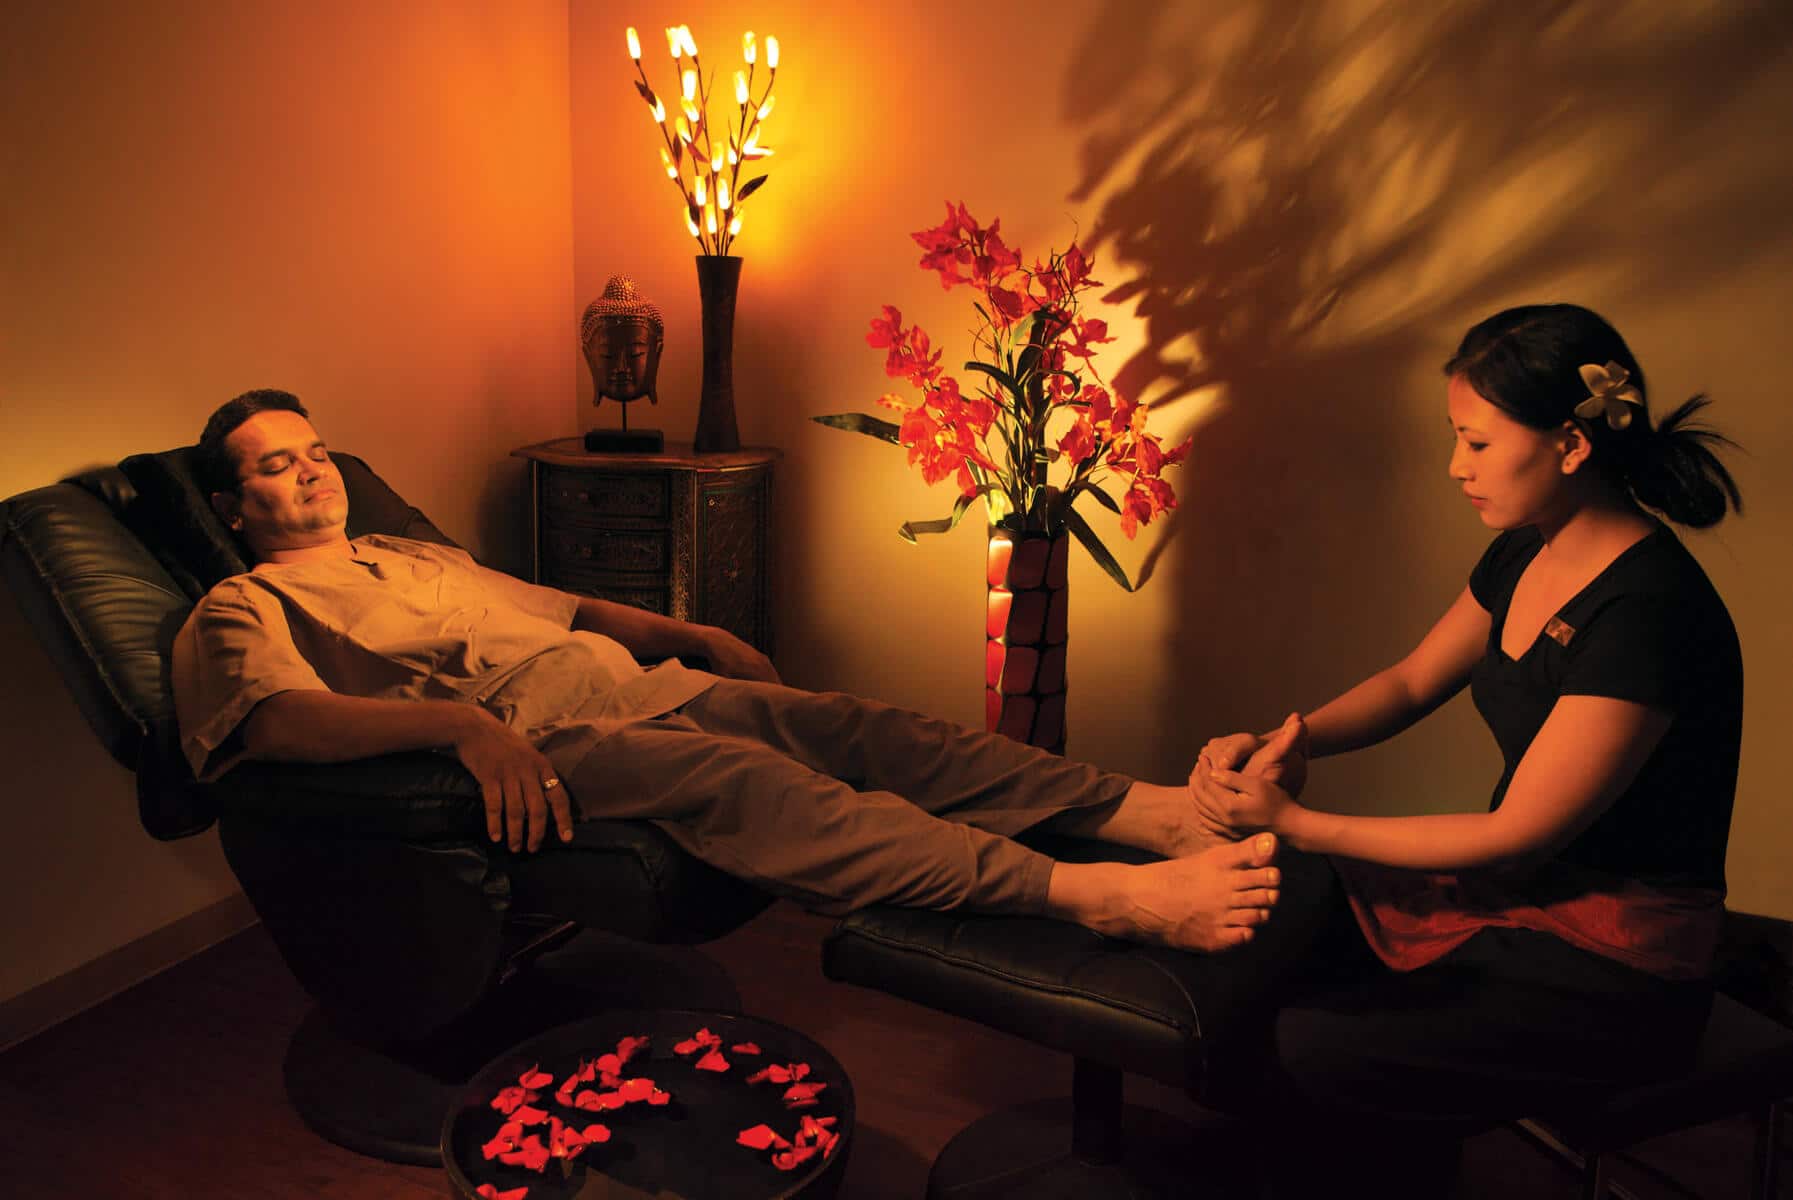 New Terms to Regulate Massage Centers